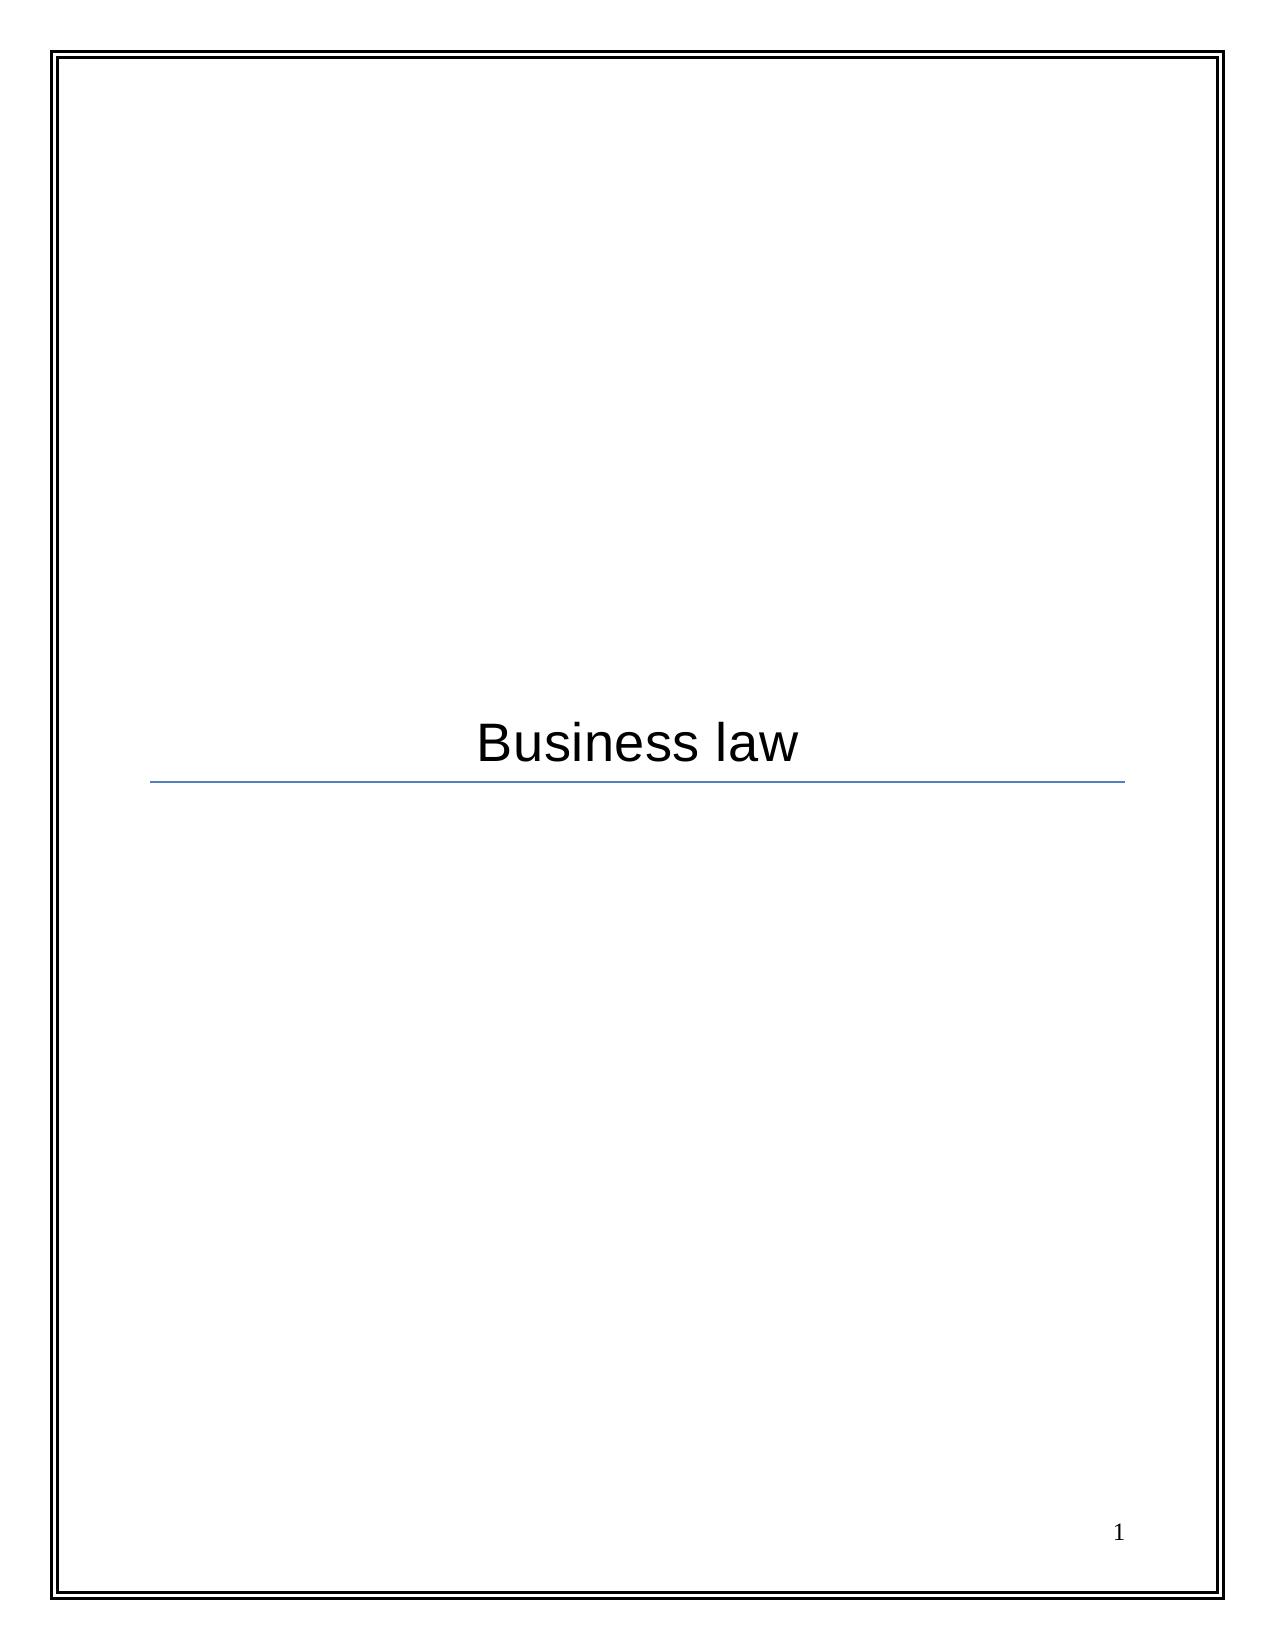 English Legal System and Business Law_1